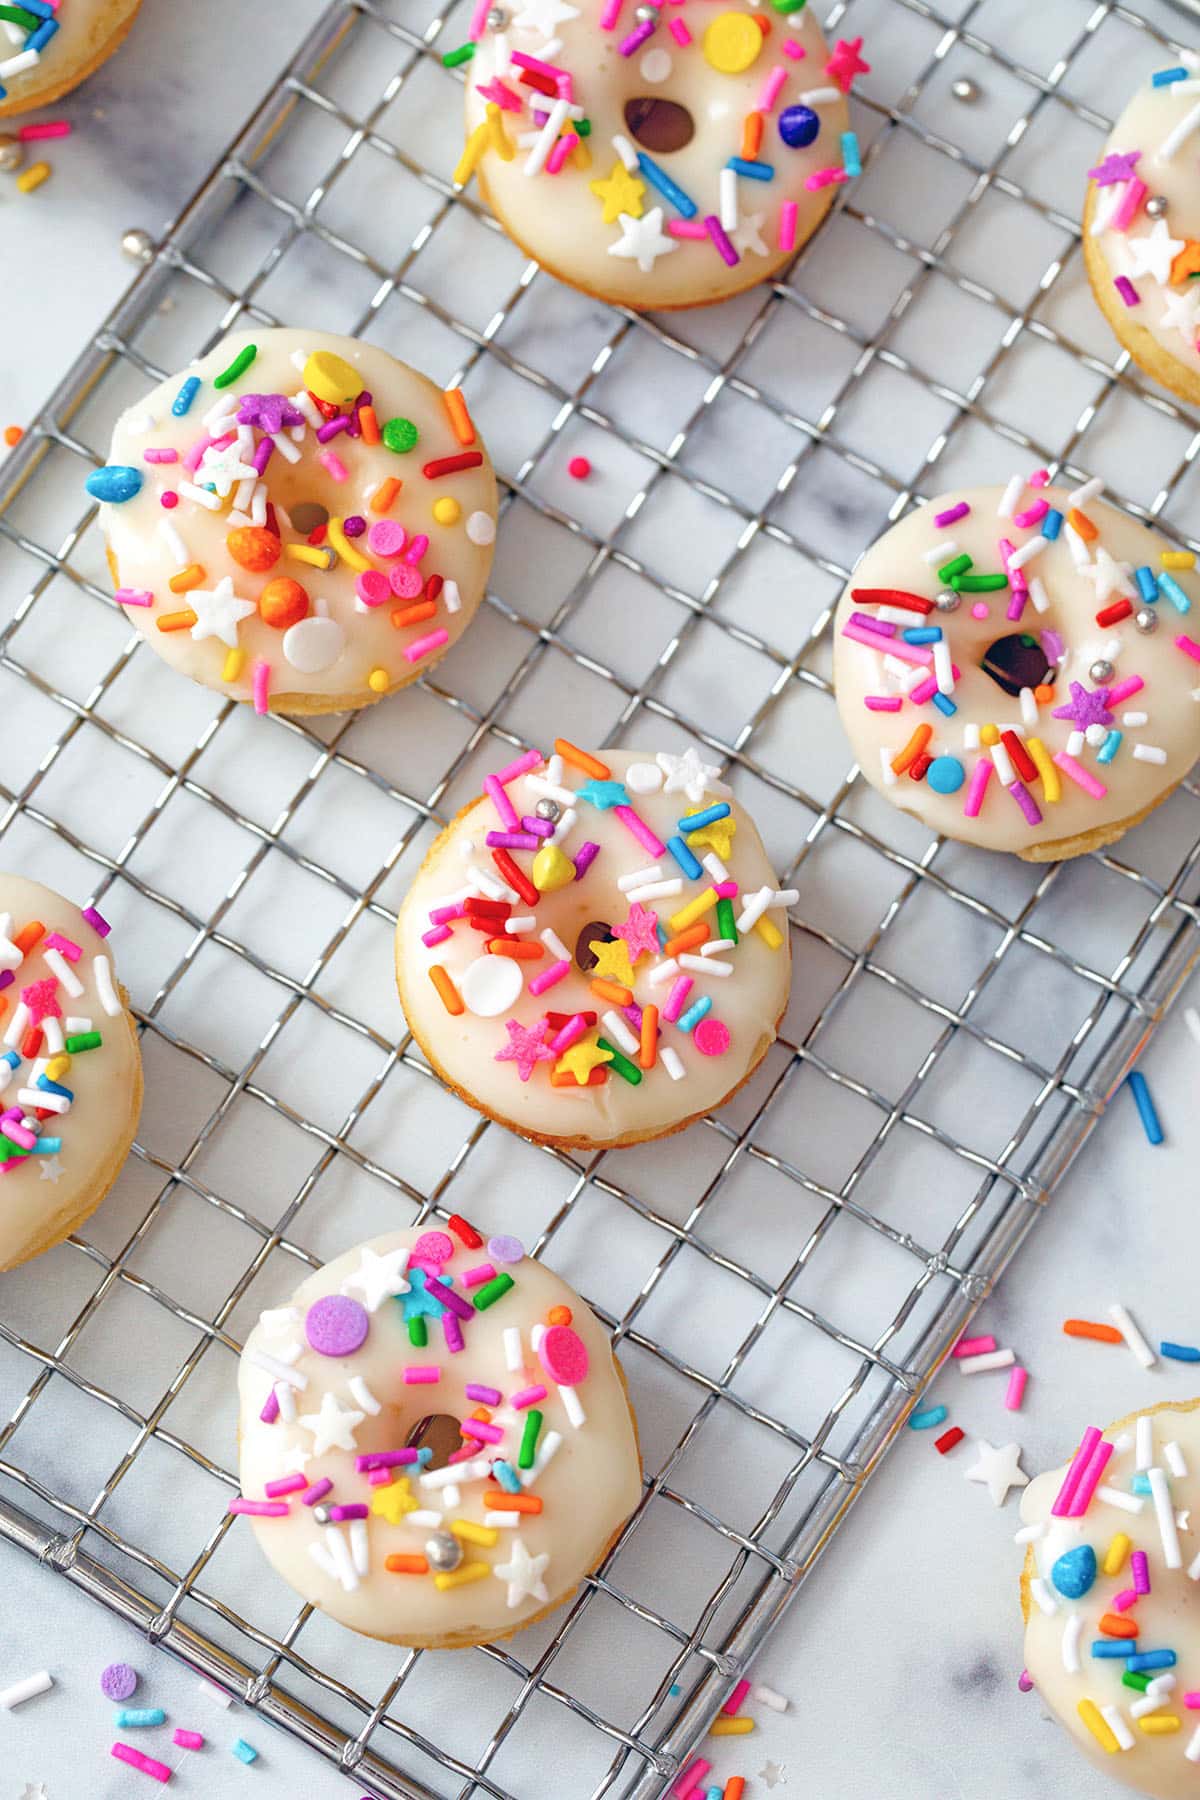 Pink Party Donuts - Sally's Baking Addiction